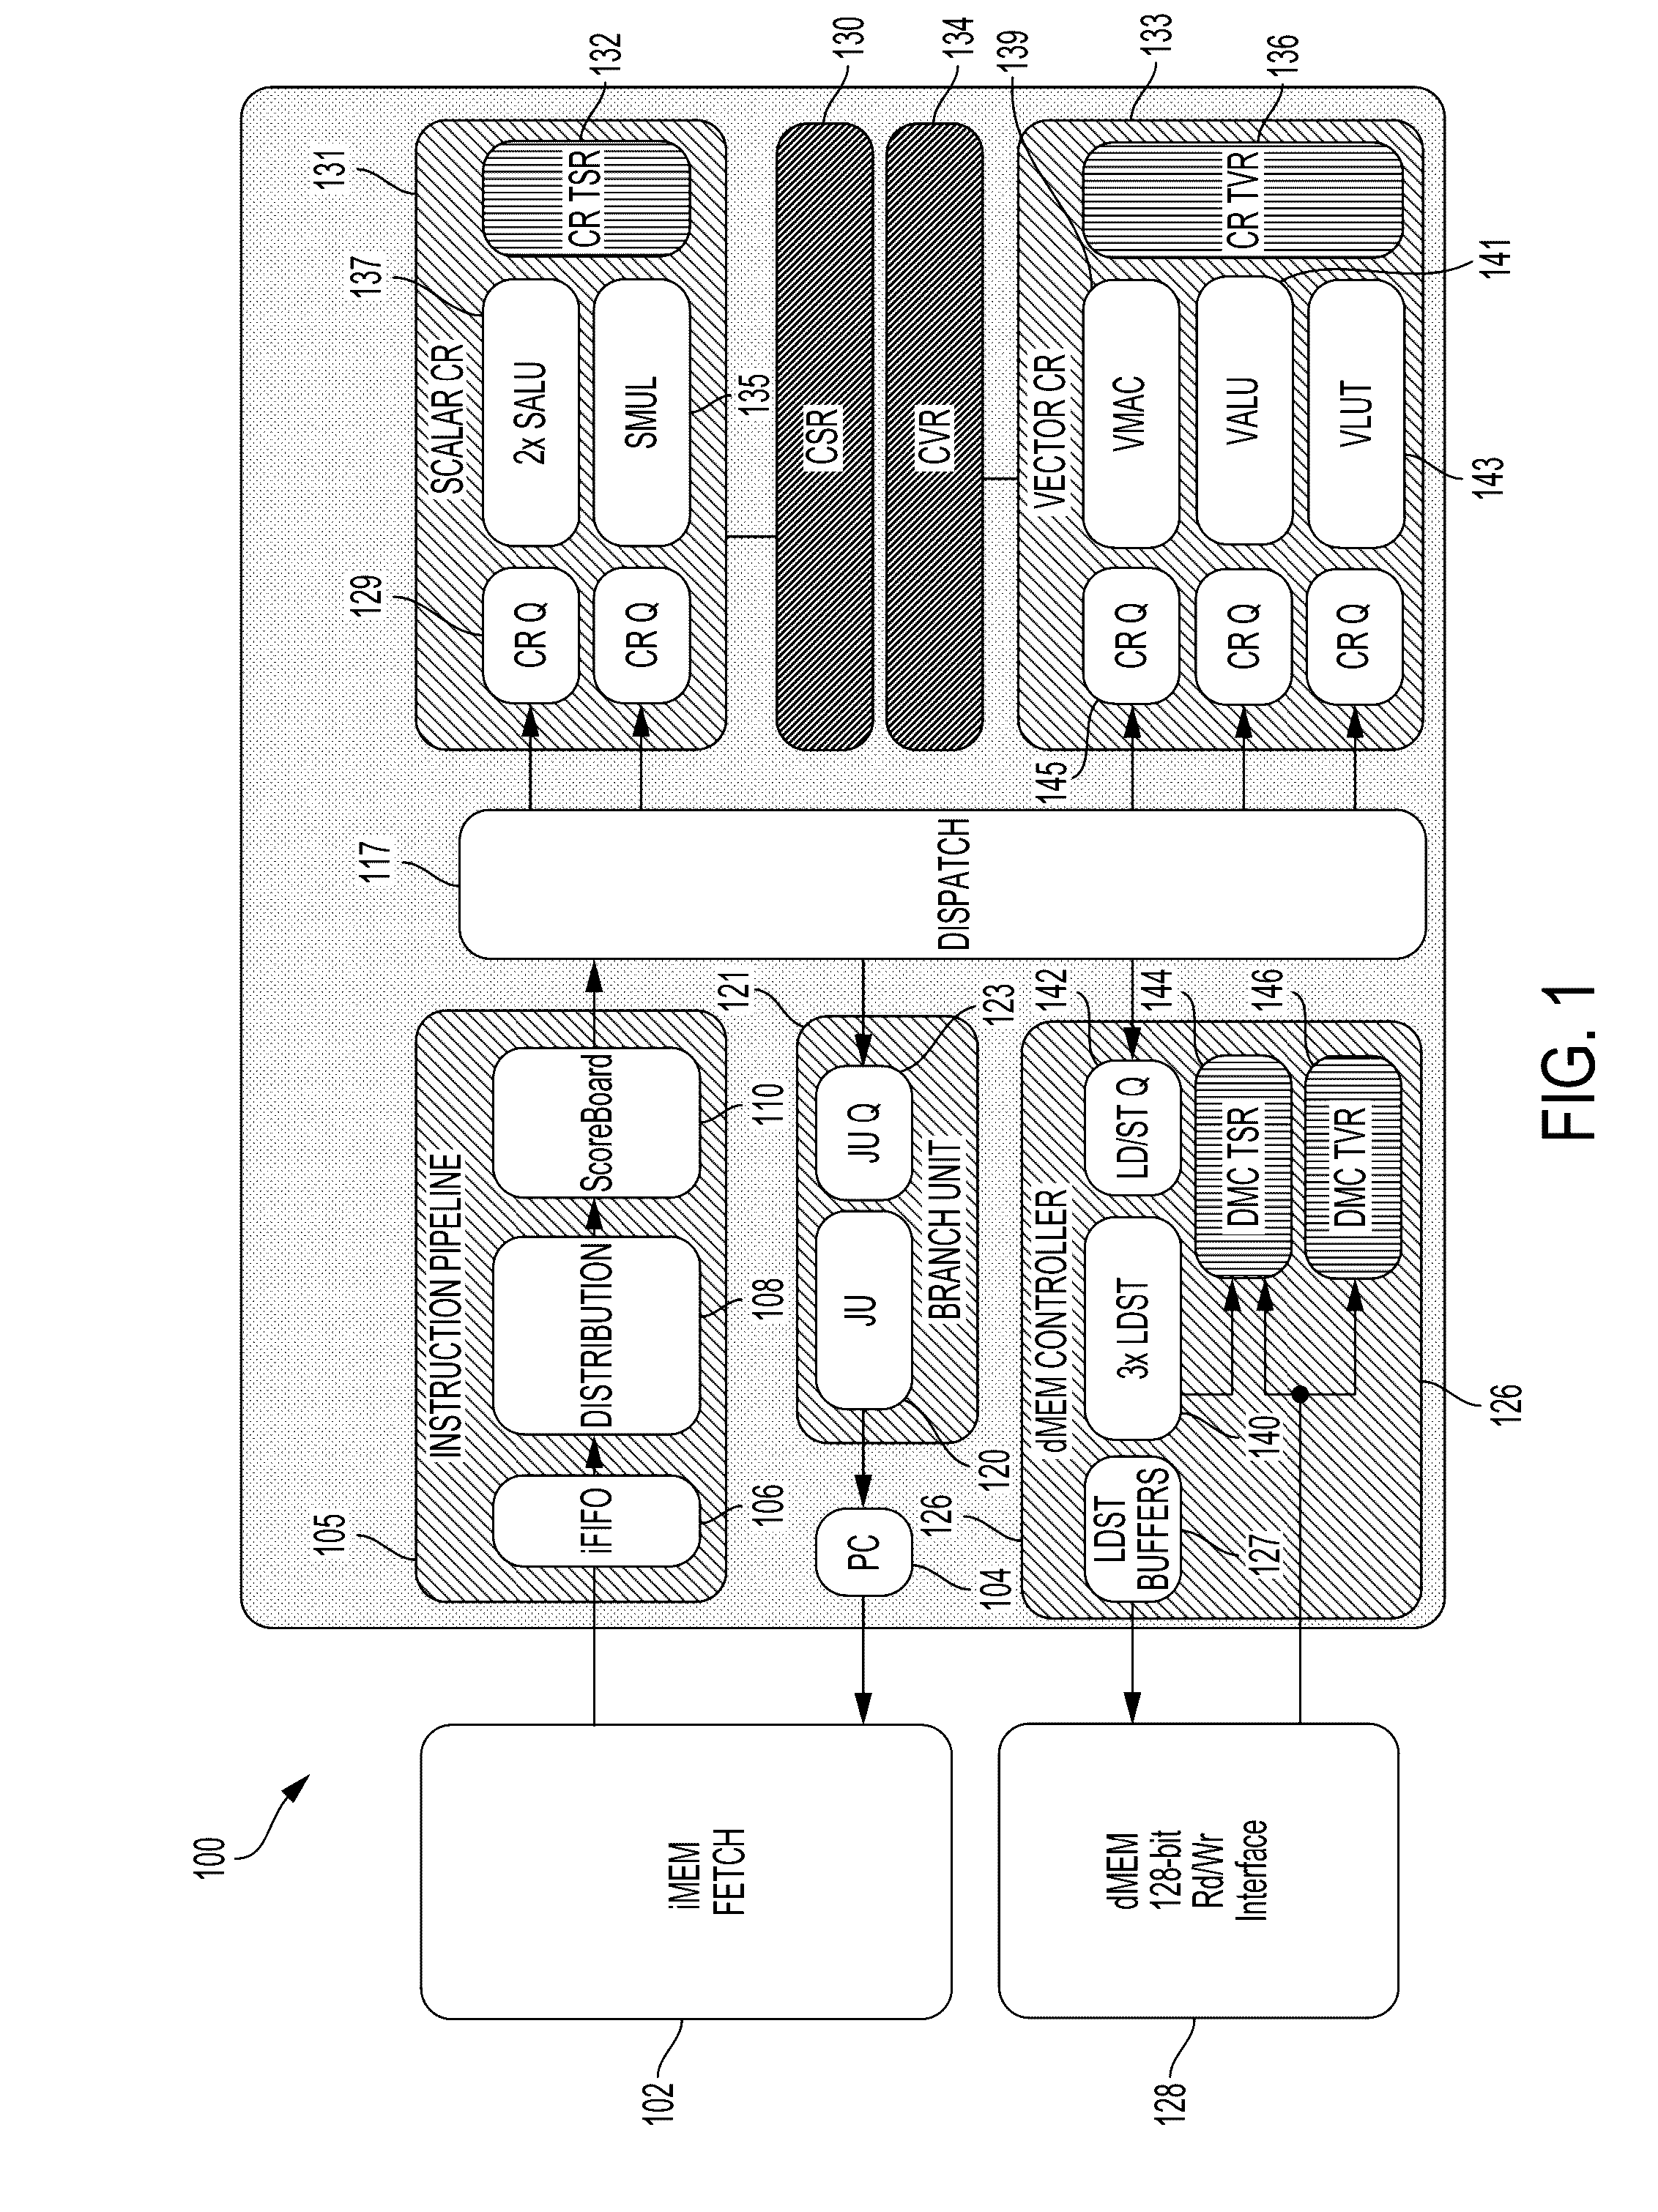 Device and processing architecture for instruction memory efficiency